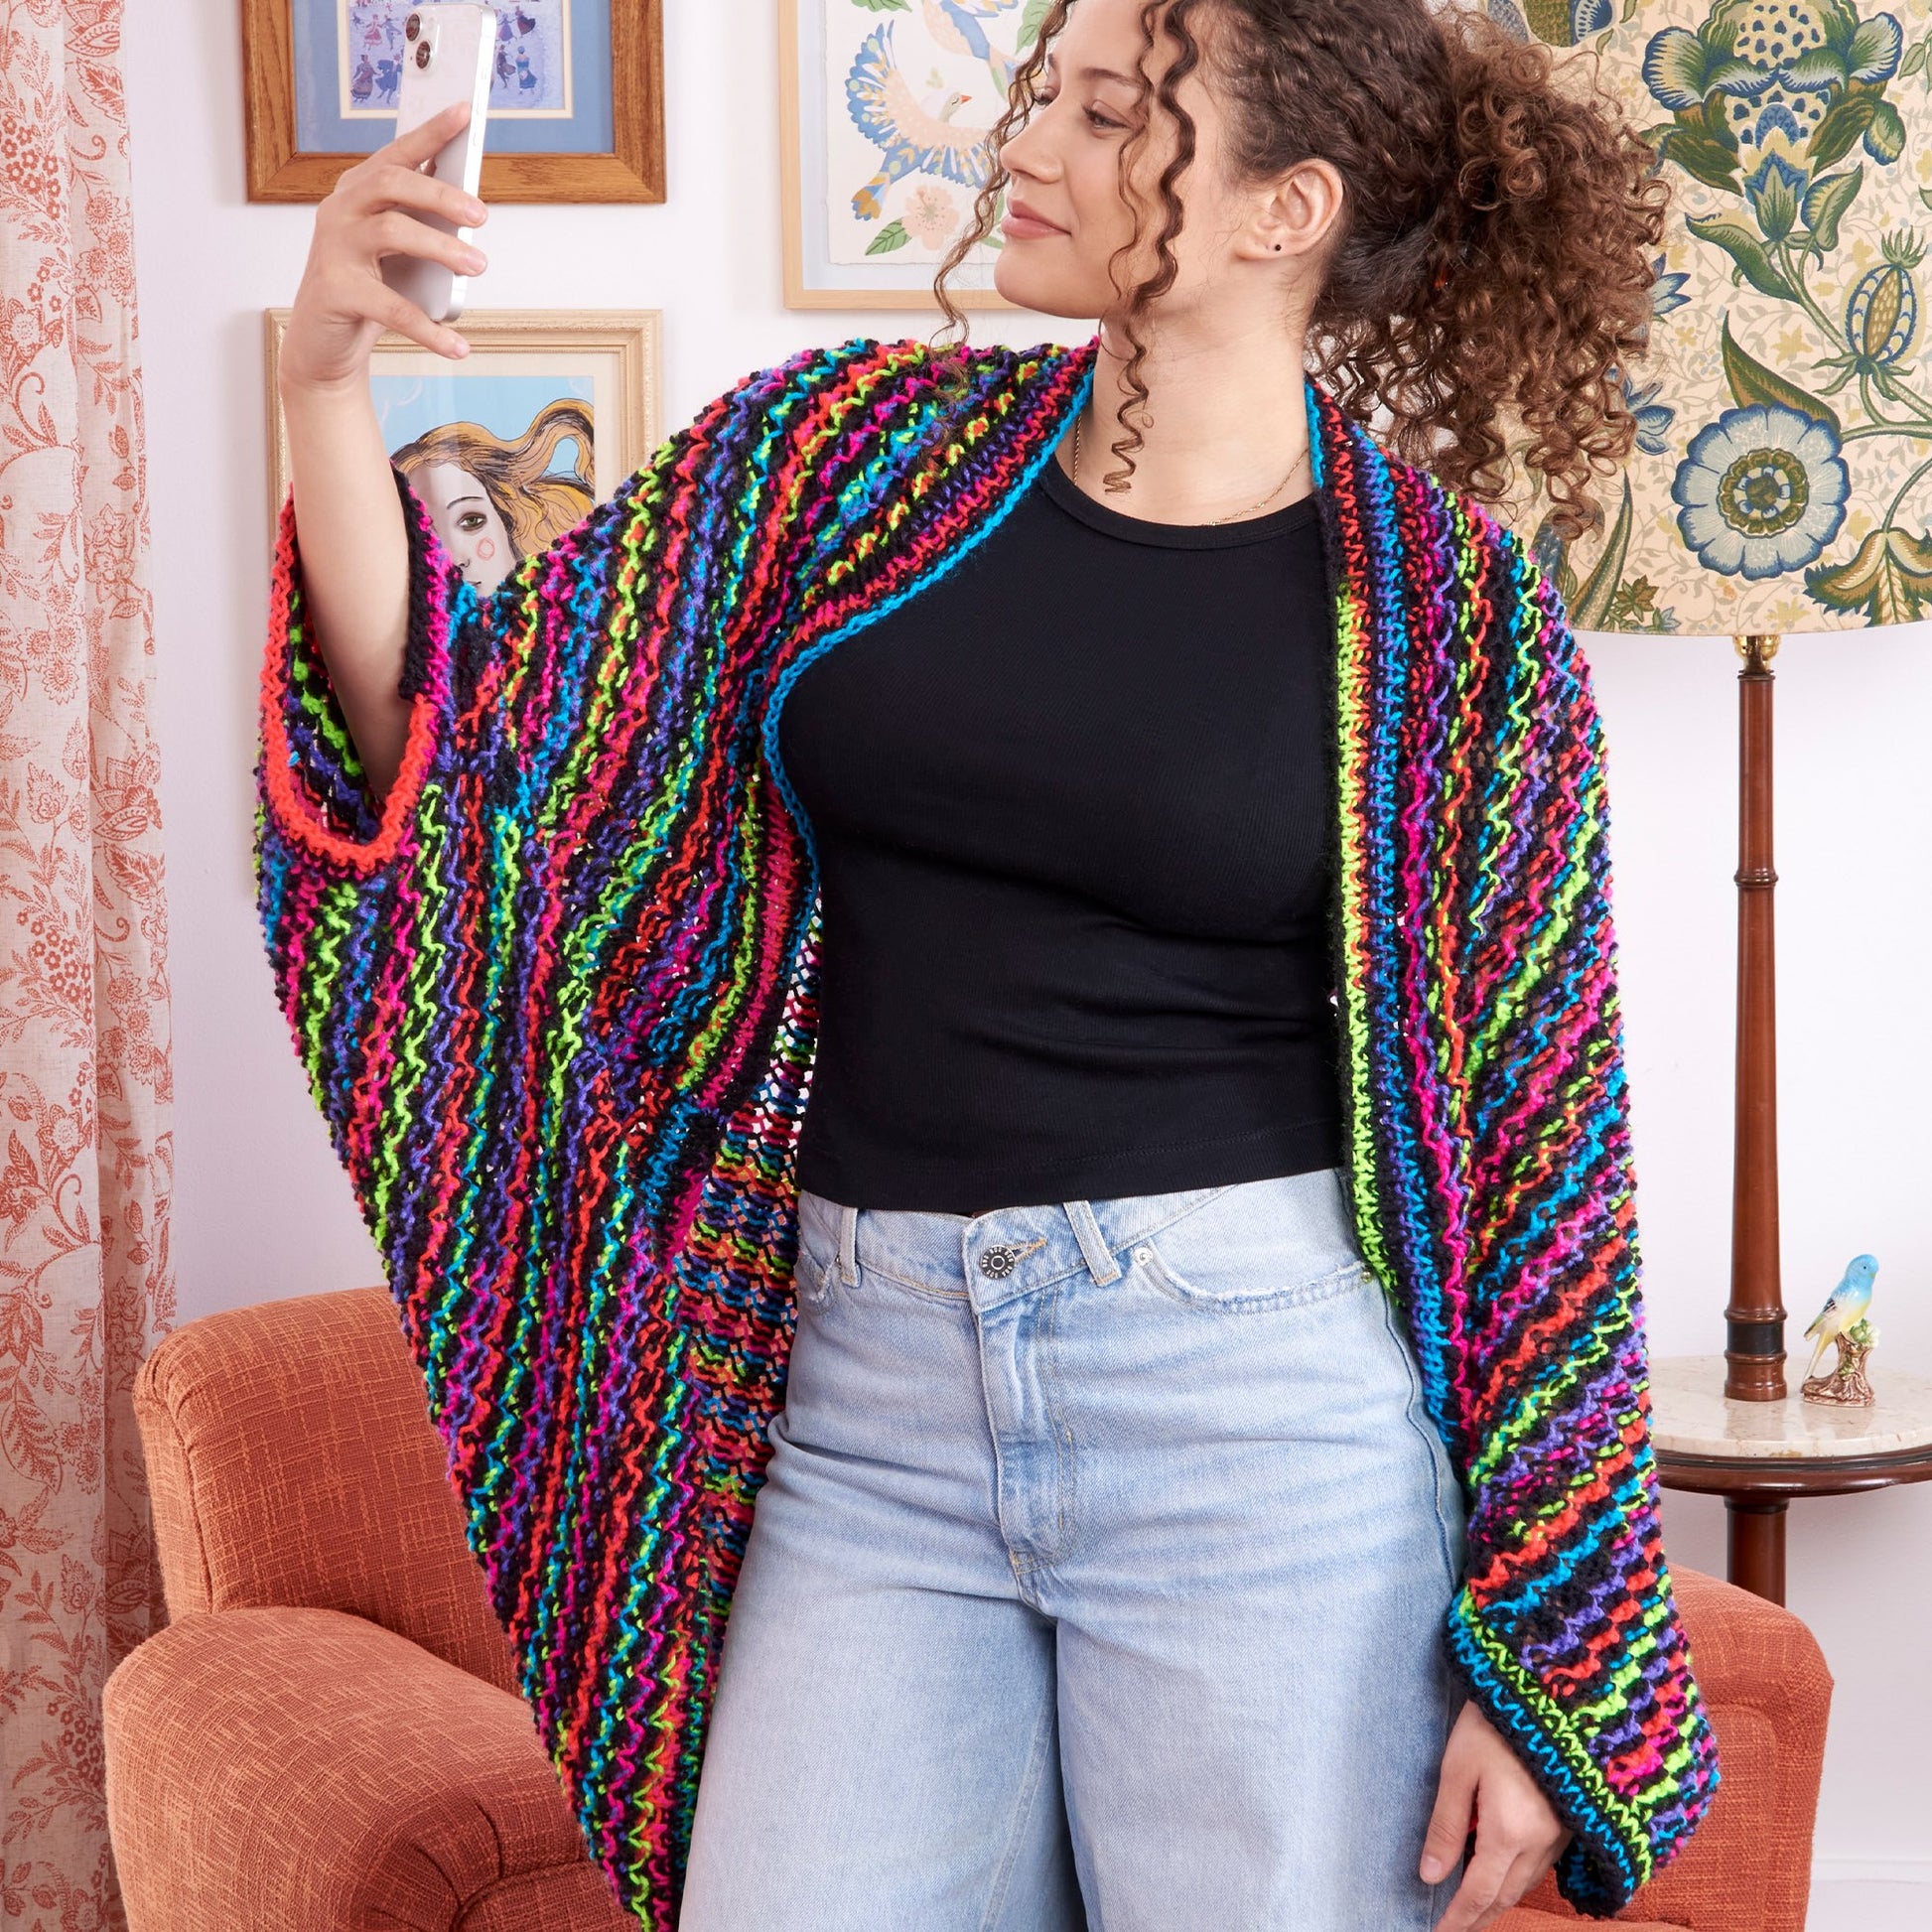 Free Red Heart Spectrum Striped Snuggle Knit Cocoon Cardi Pattern